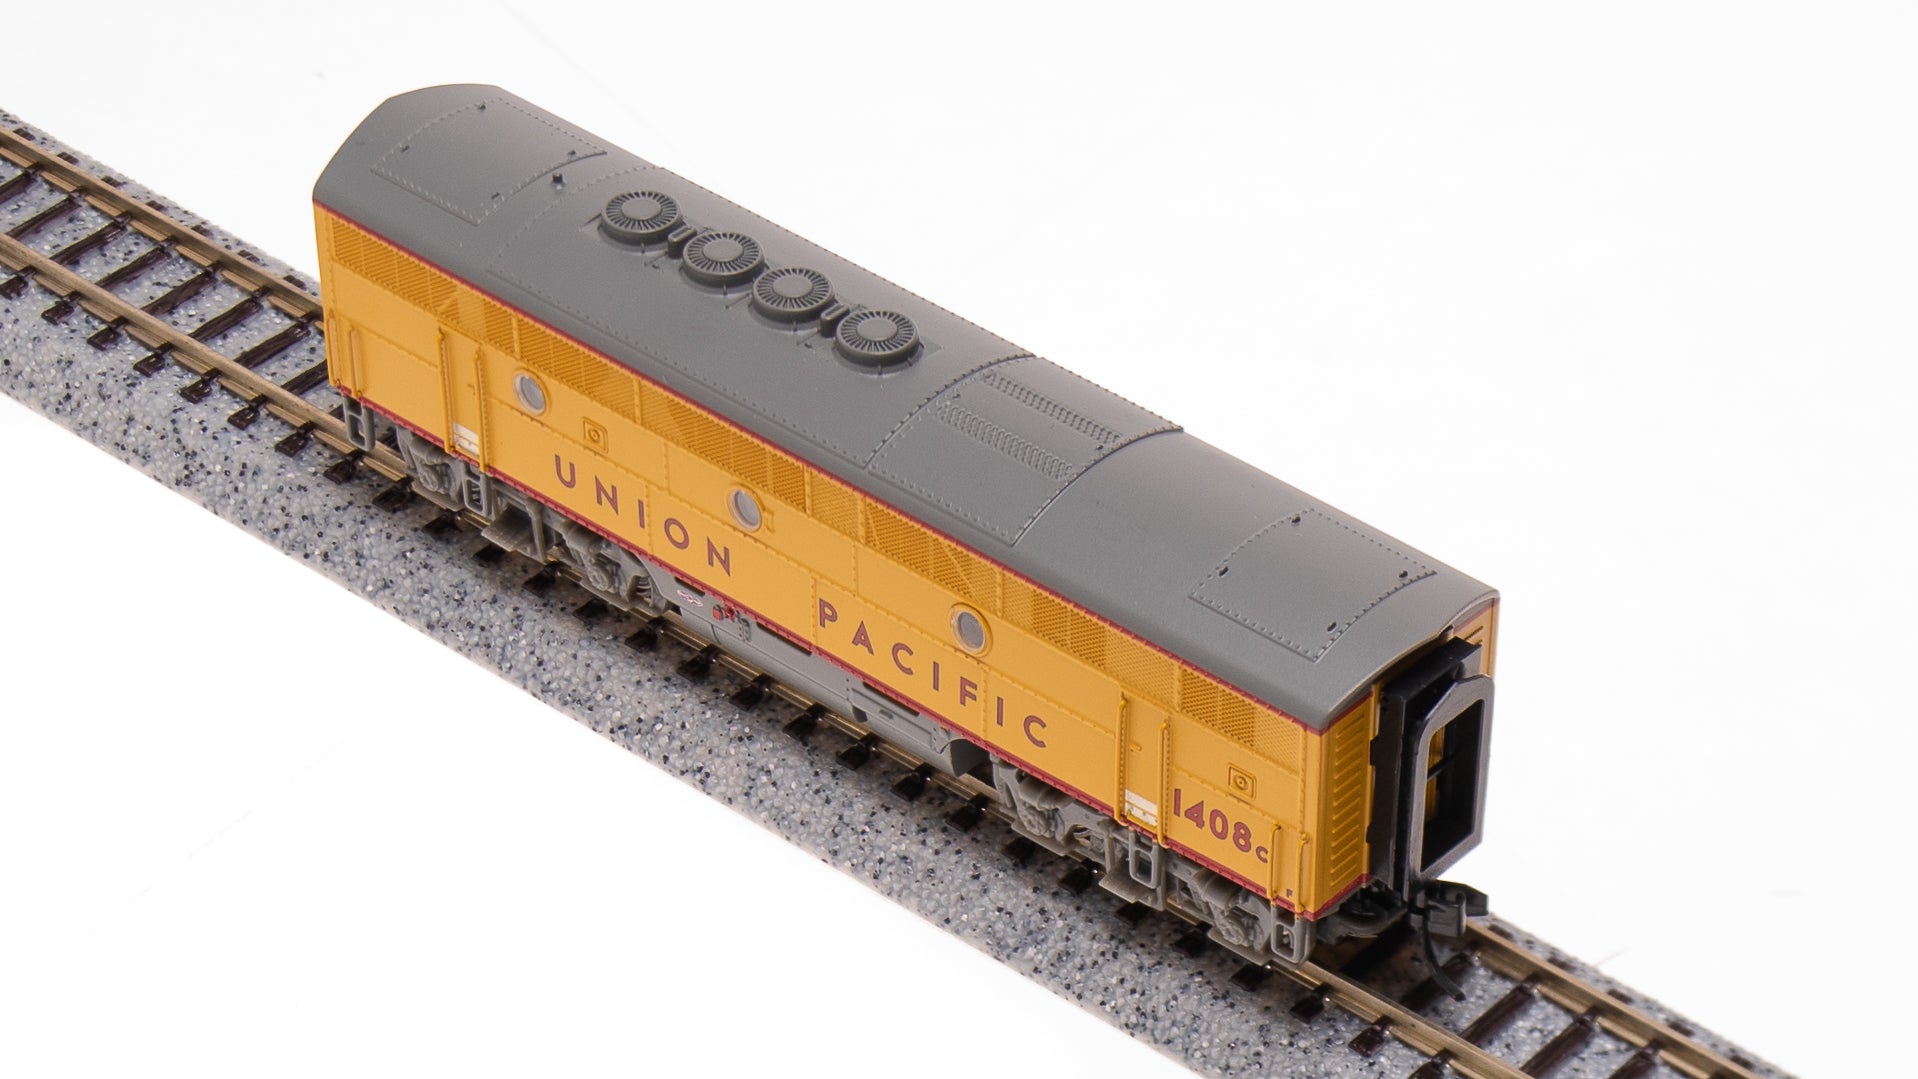 6852 EMD F3B, UP 1408C, Yellow & Gray As-Delivered, Paragon4 Sound/DC/DCC, N Default Title